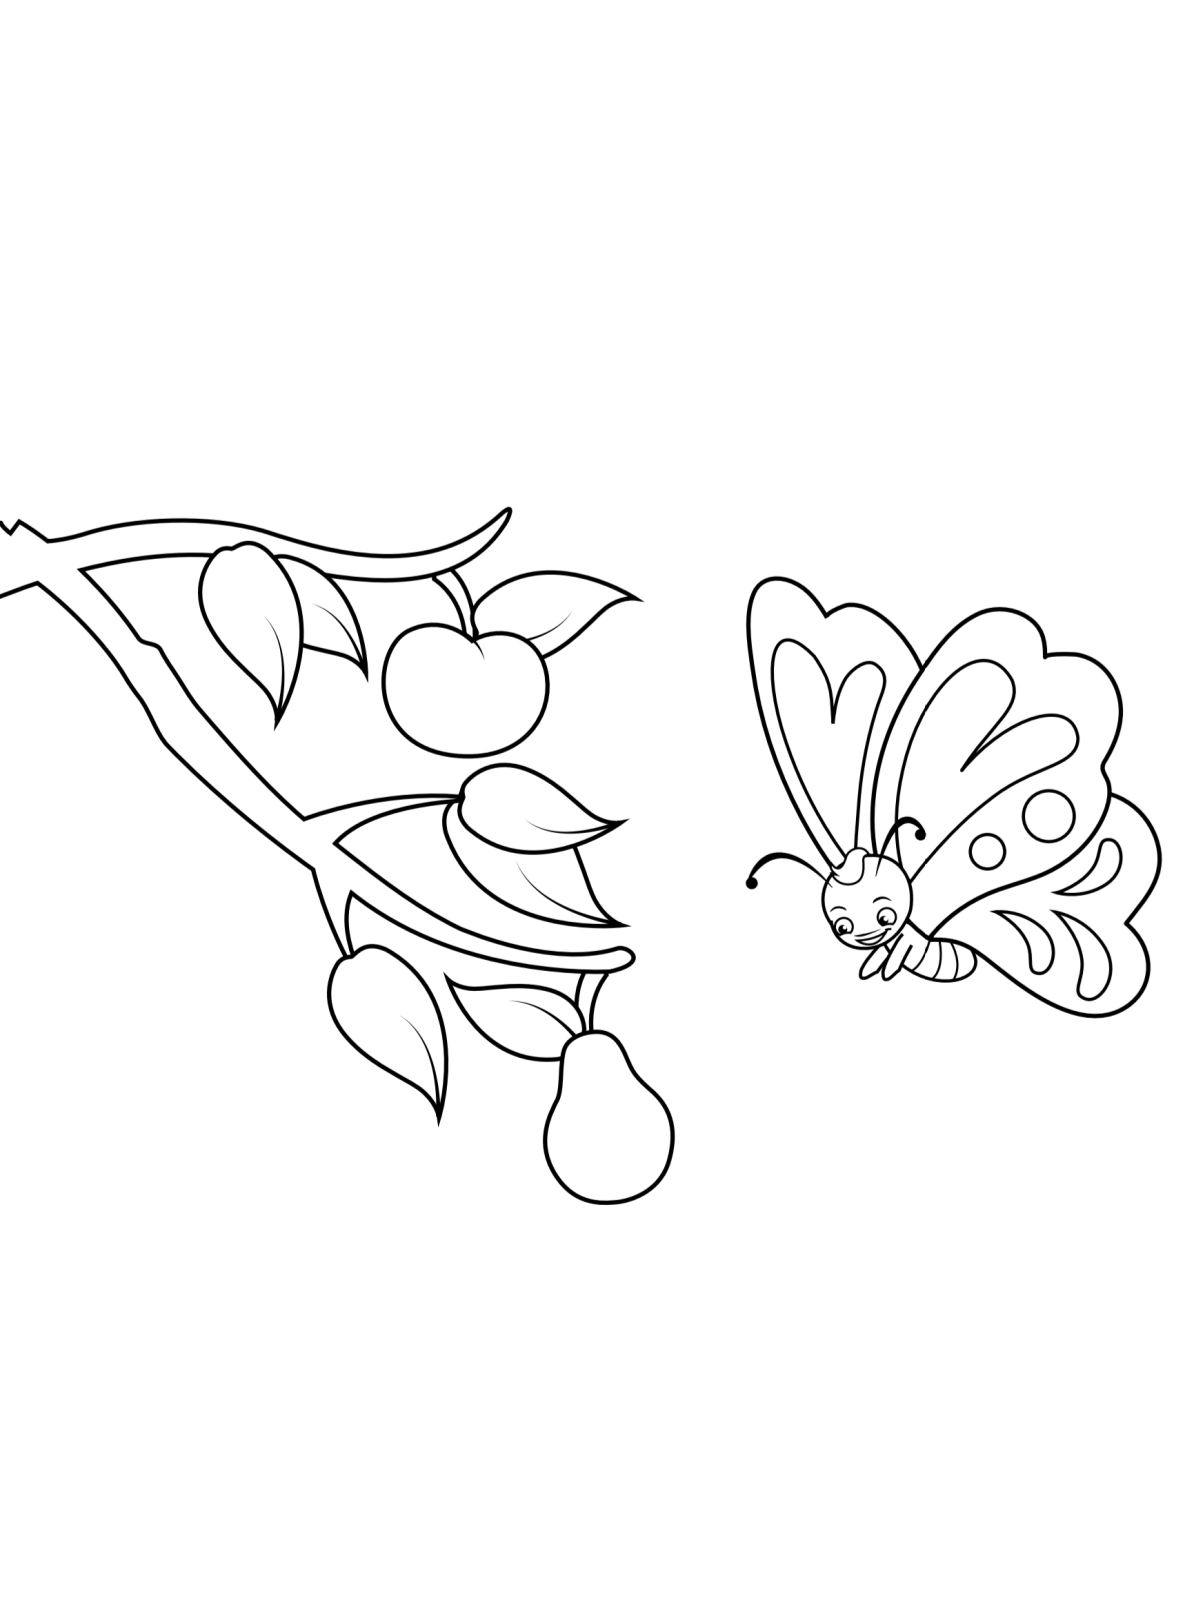 Kids-n-fun.com | Create personal coloring page of Butterfly Kids